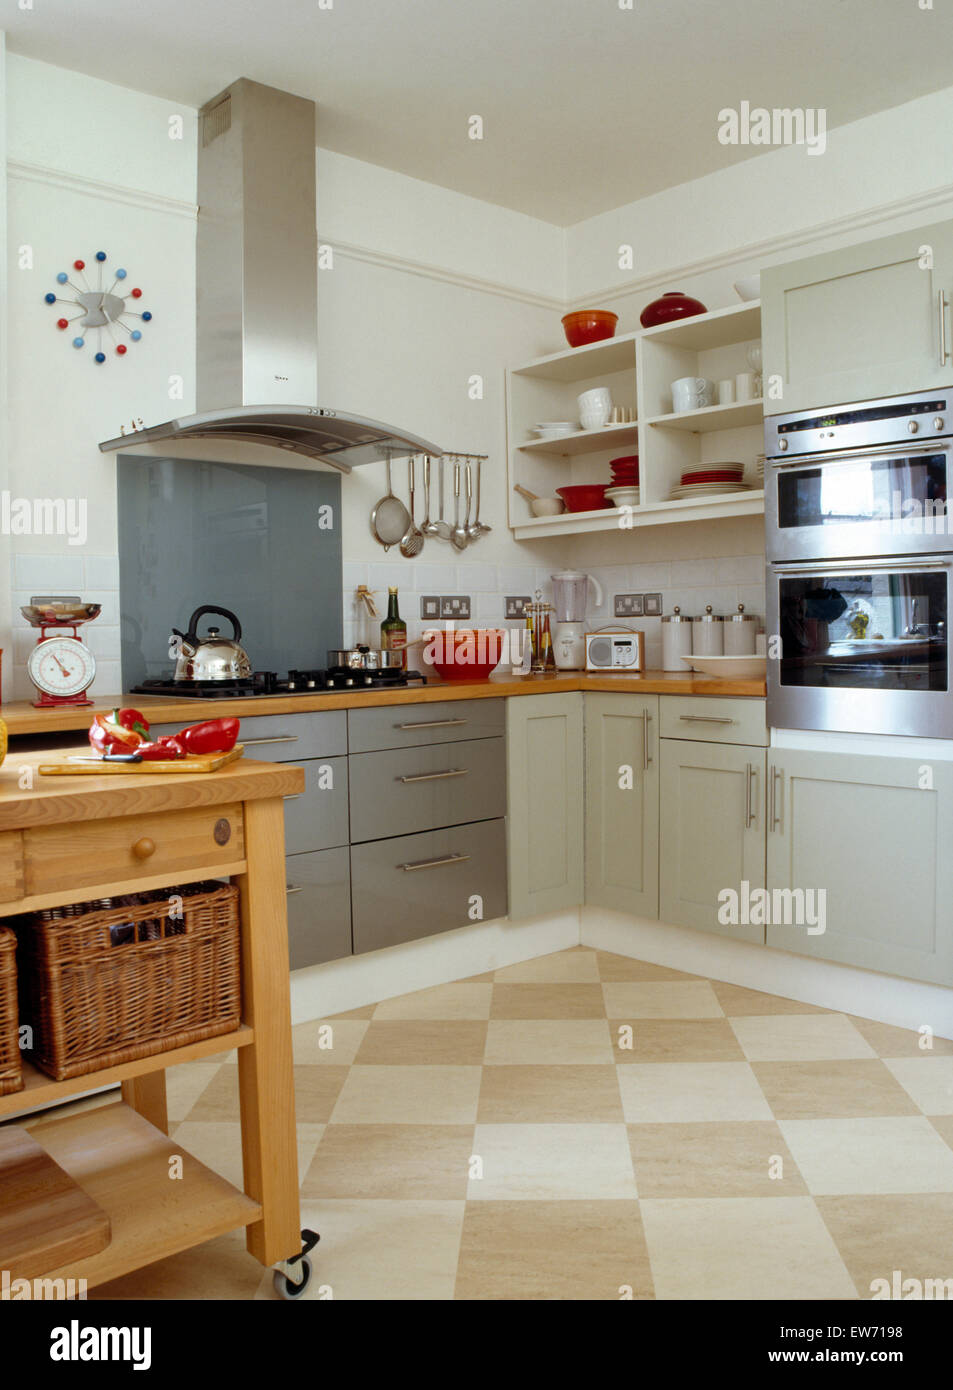 Checkerboard tiled flooring in modern kitchen with stainless steel extractor above hob in gray fitted unit Stock Photo